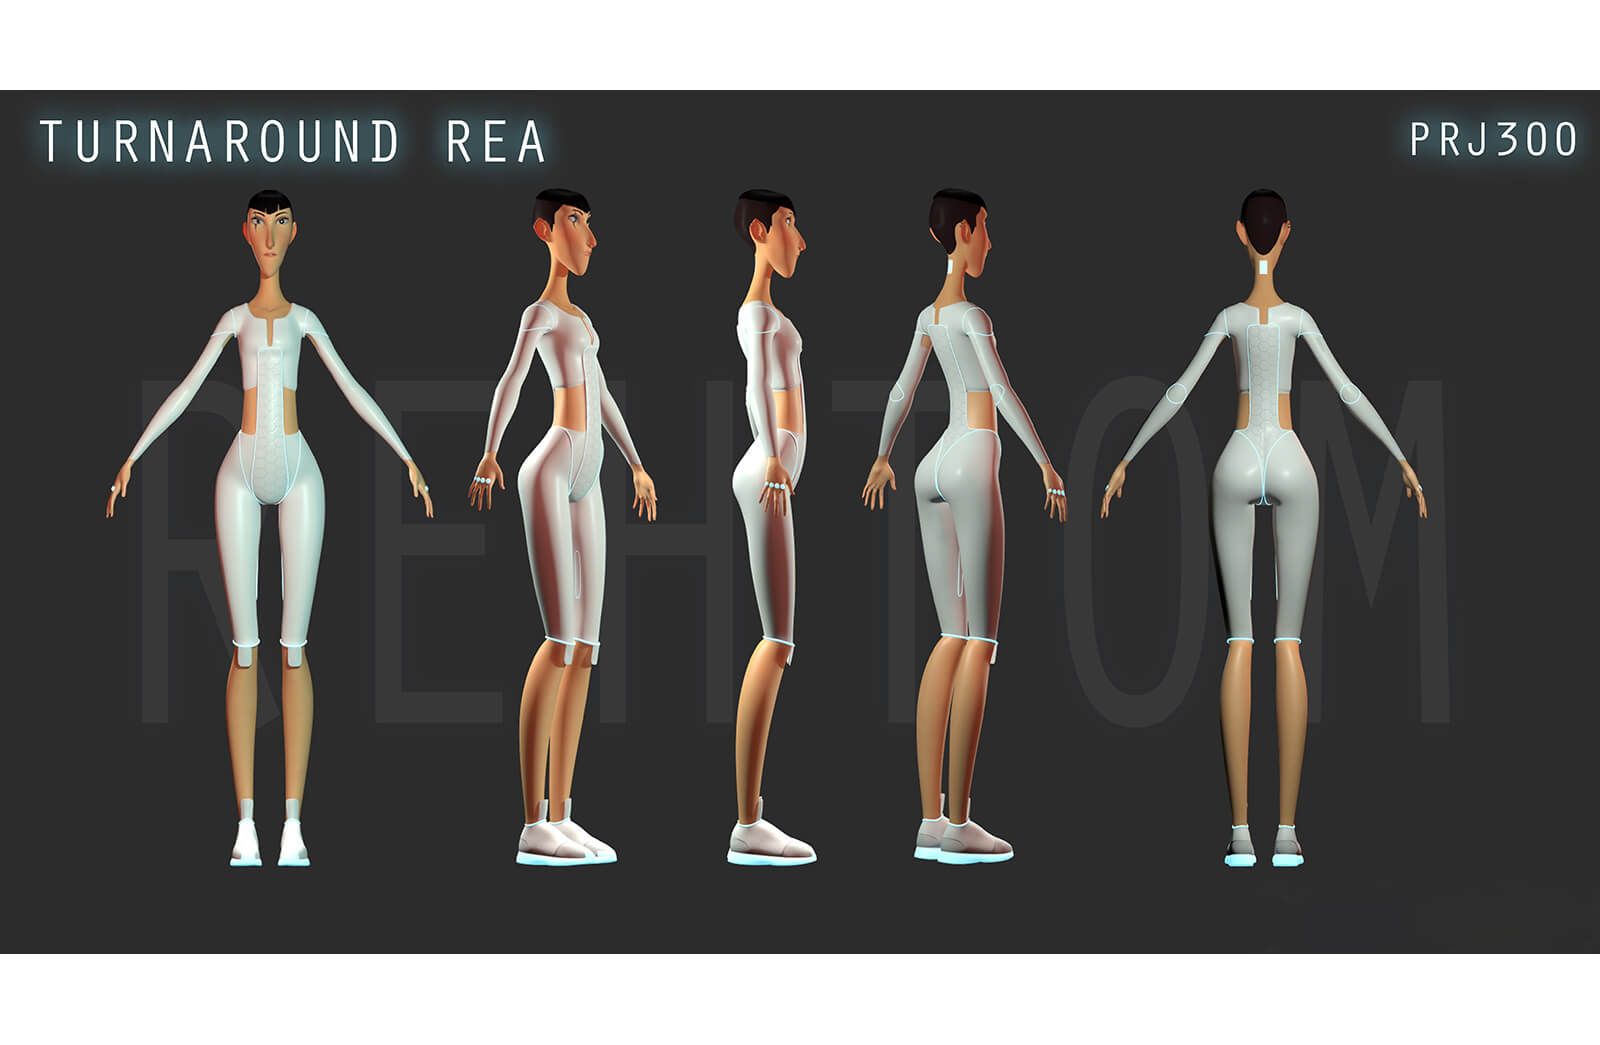 Turnaround 3D character model of a tall, thin woman standing in futuristic white clothing from different angles